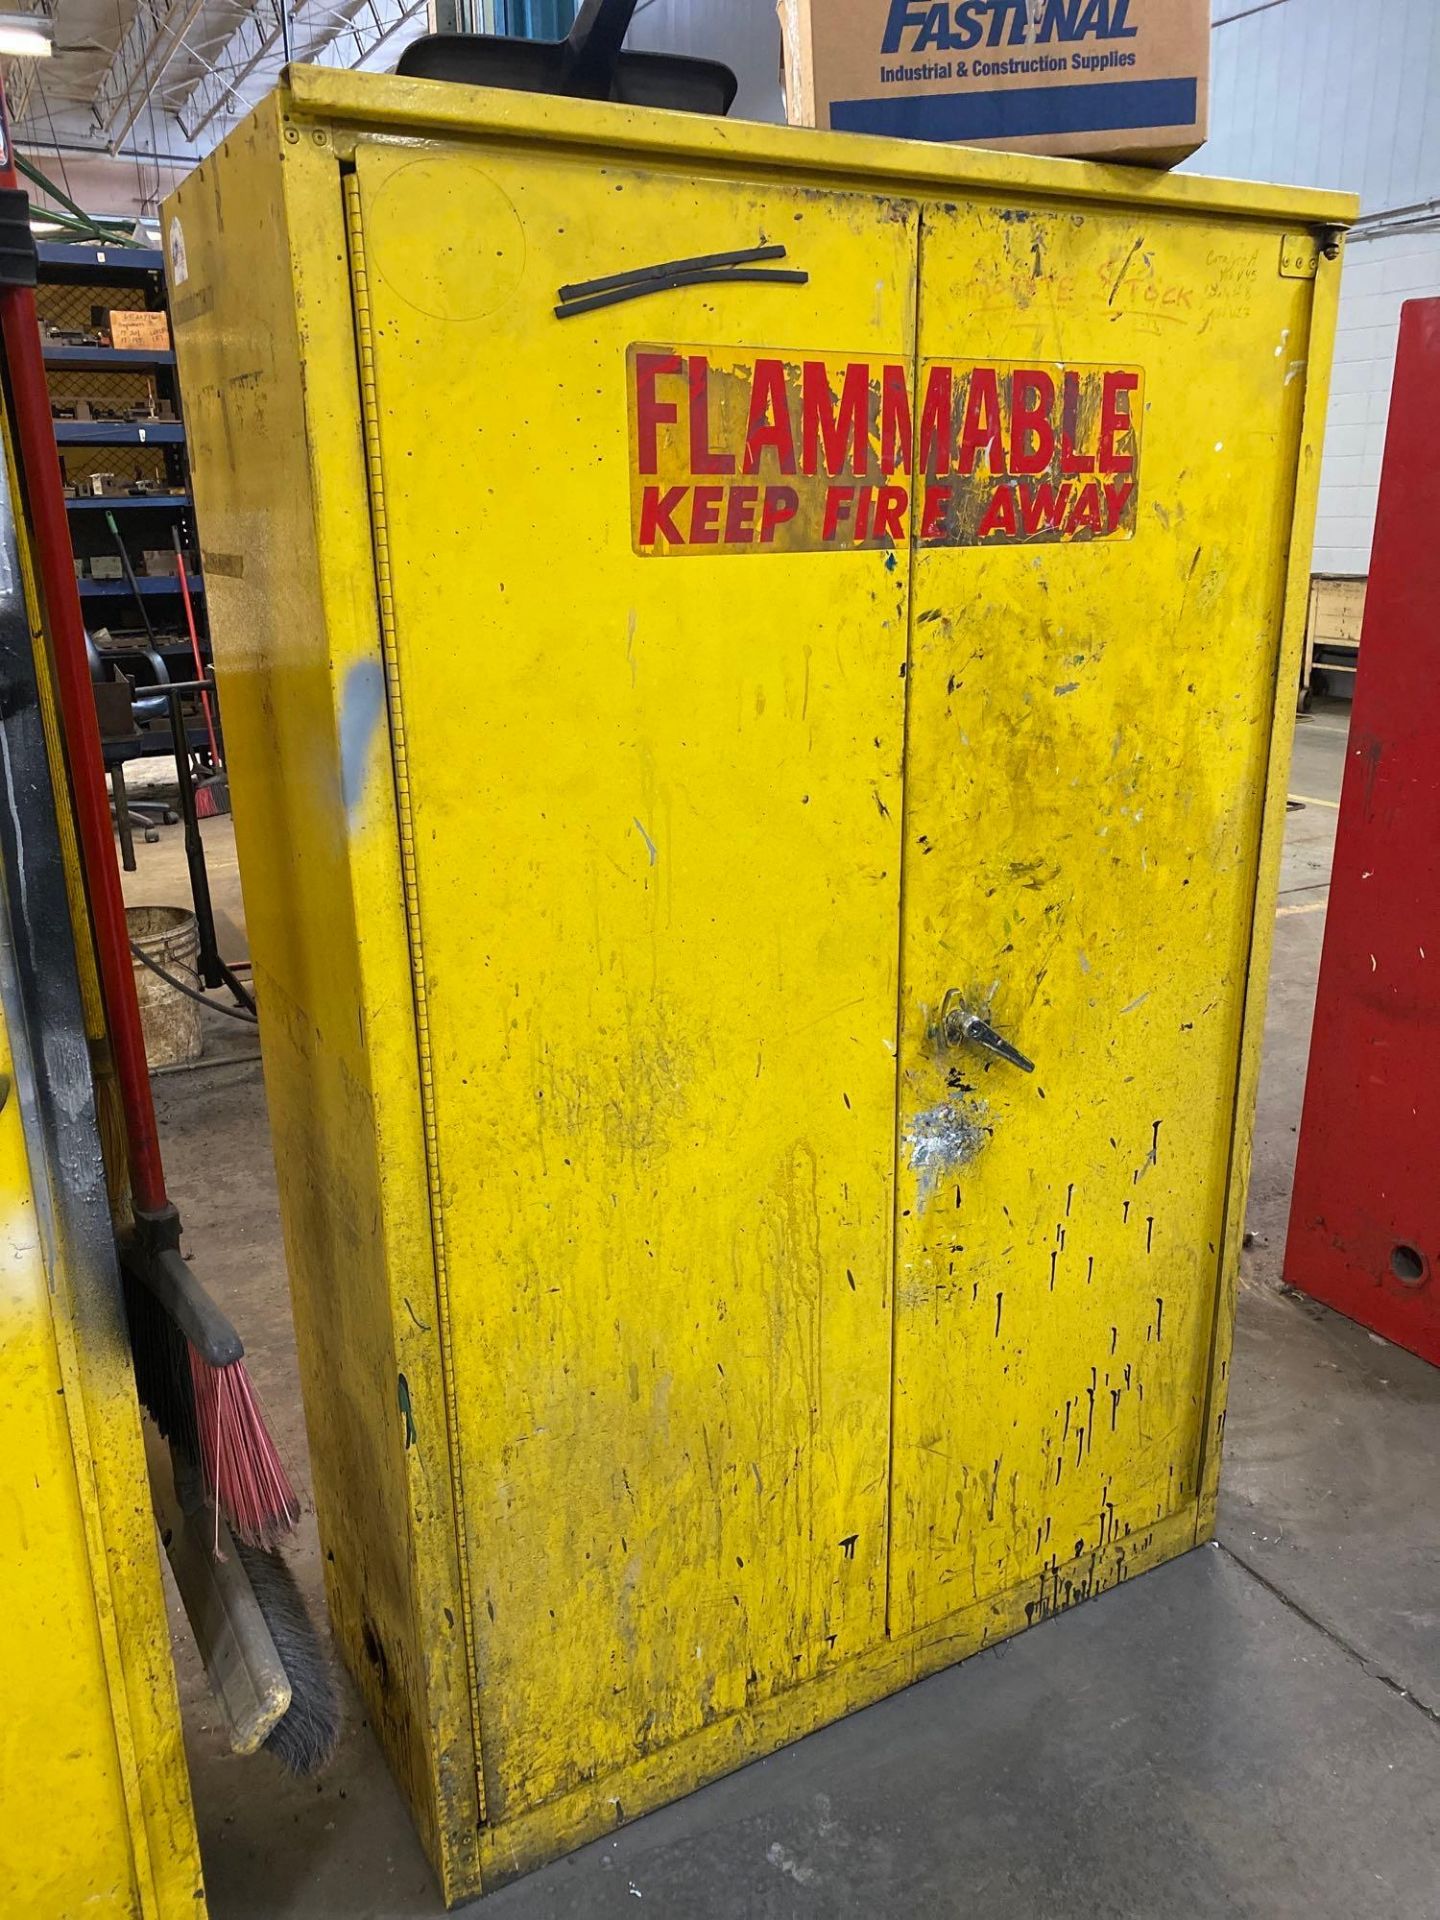 Justrite 60 Gallon Capacity Flammable Storage Cabinet - Image 3 of 5